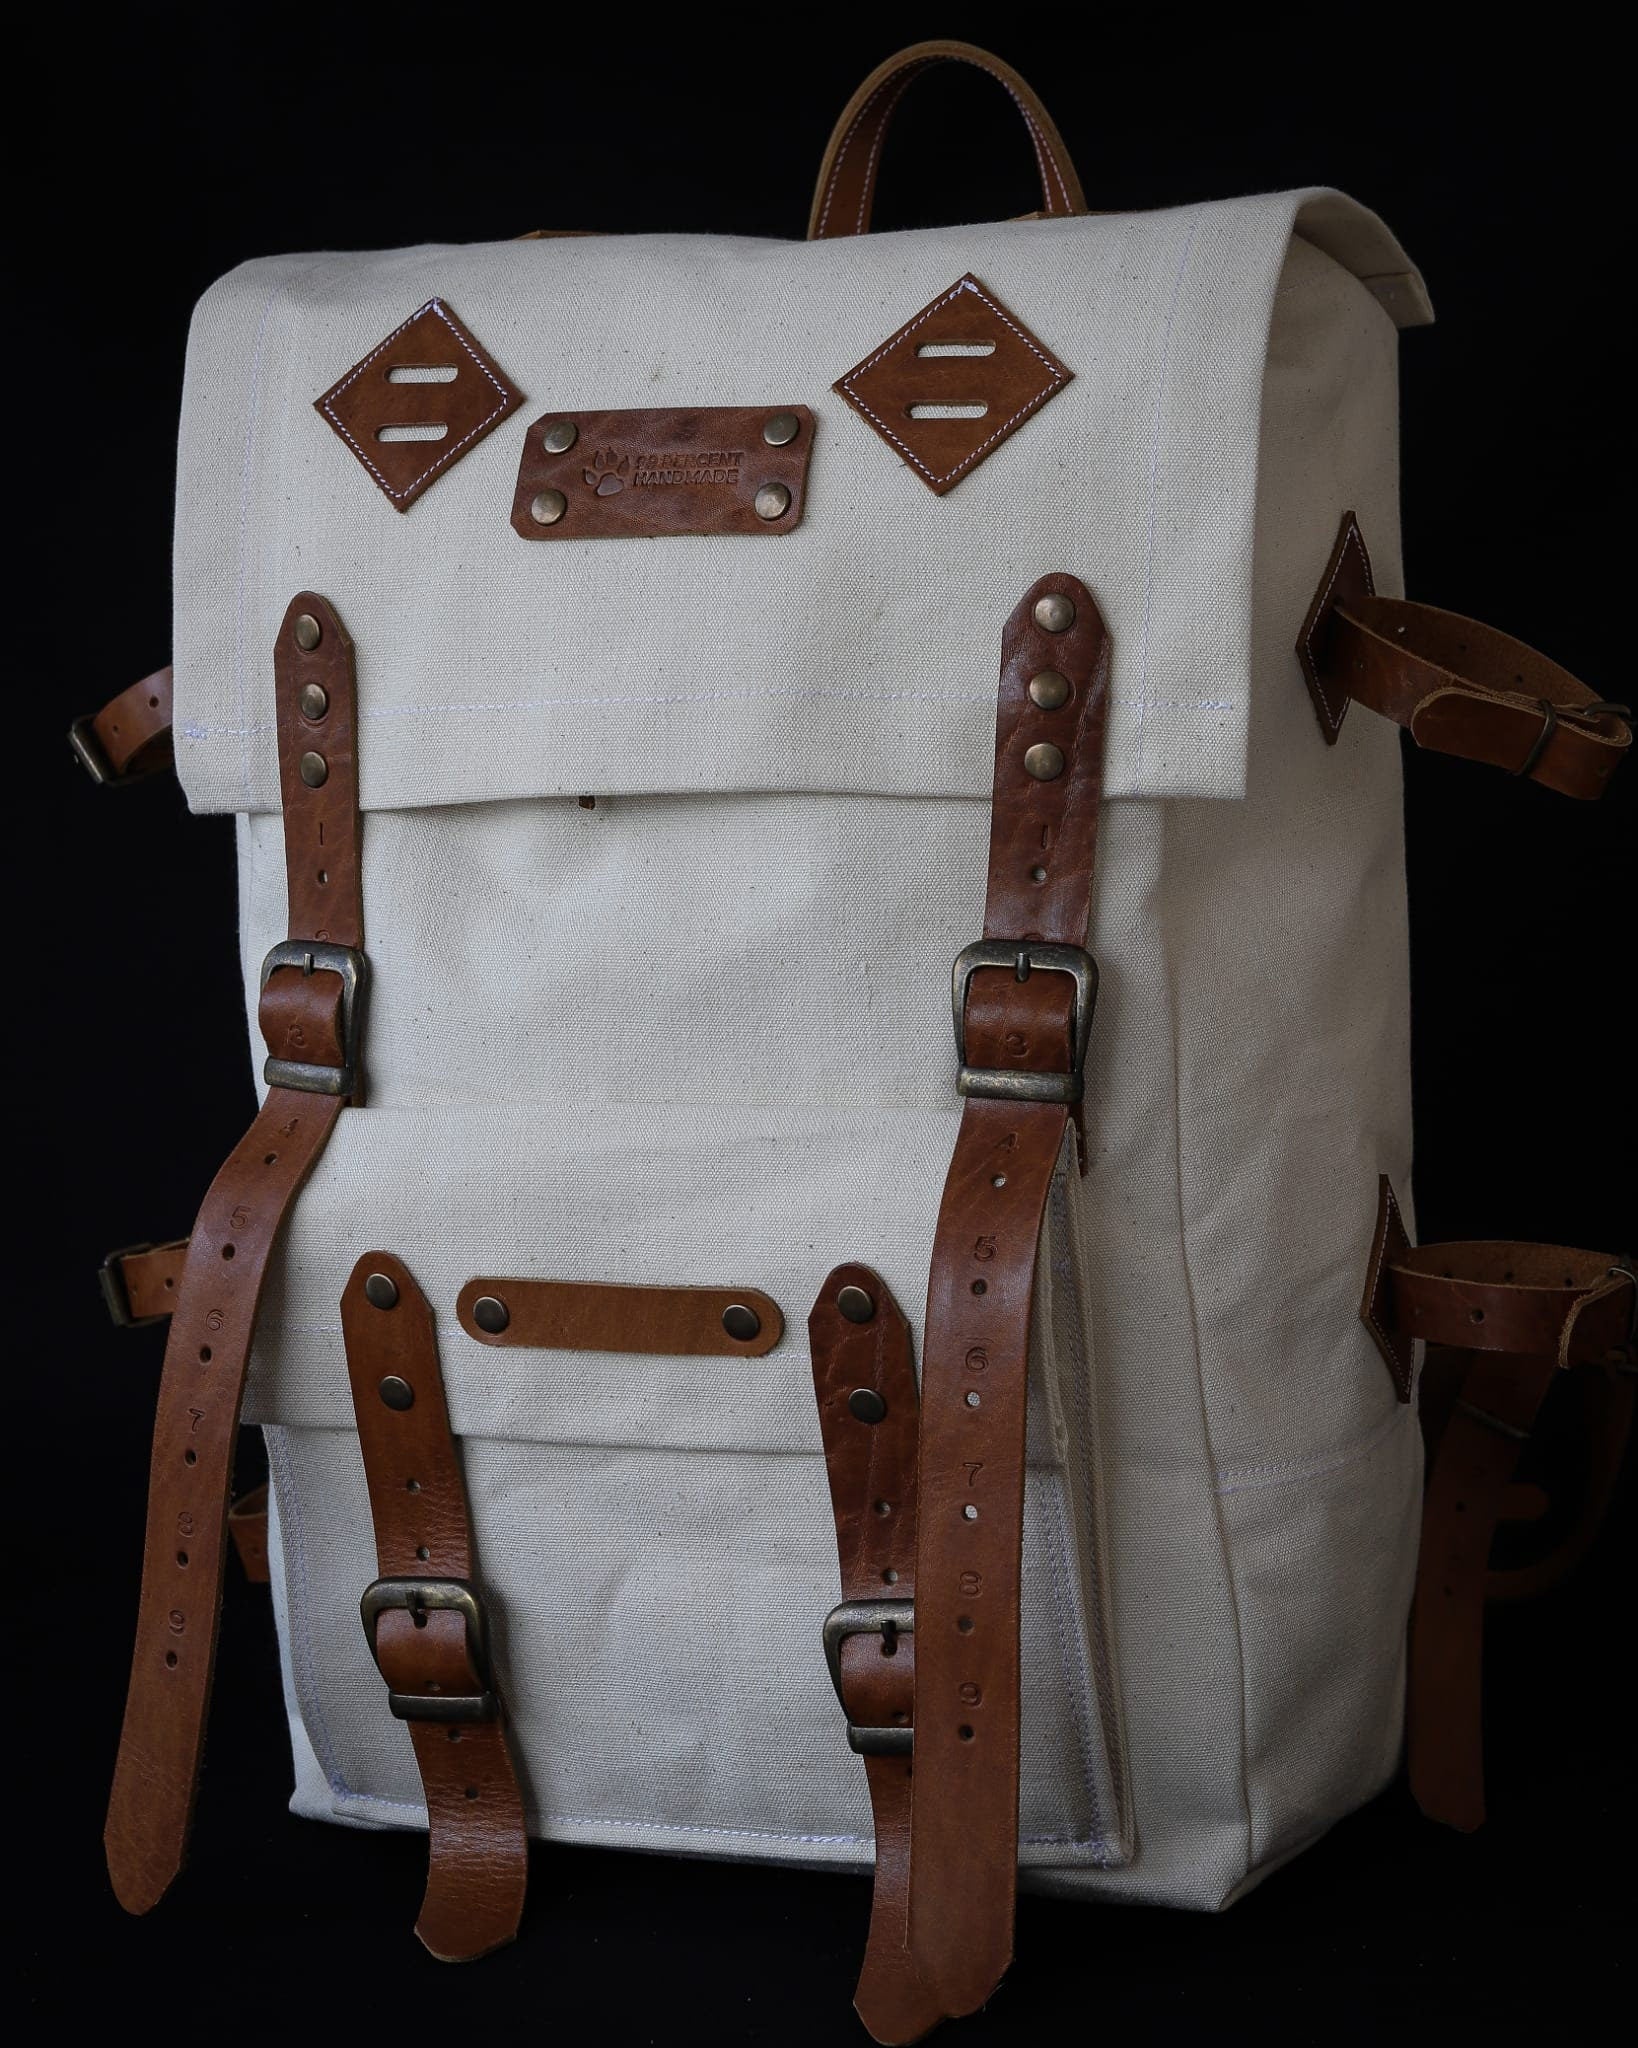 30L to 50L | Bushcraft Backpack | Brown, Green, Dhaki Colours | Handmade Leather, Waxed Canvas Backpack for Travel-Camping | Personalization bushcraft - camping - hiking backpack 99percenthandmade White 30 Liters 